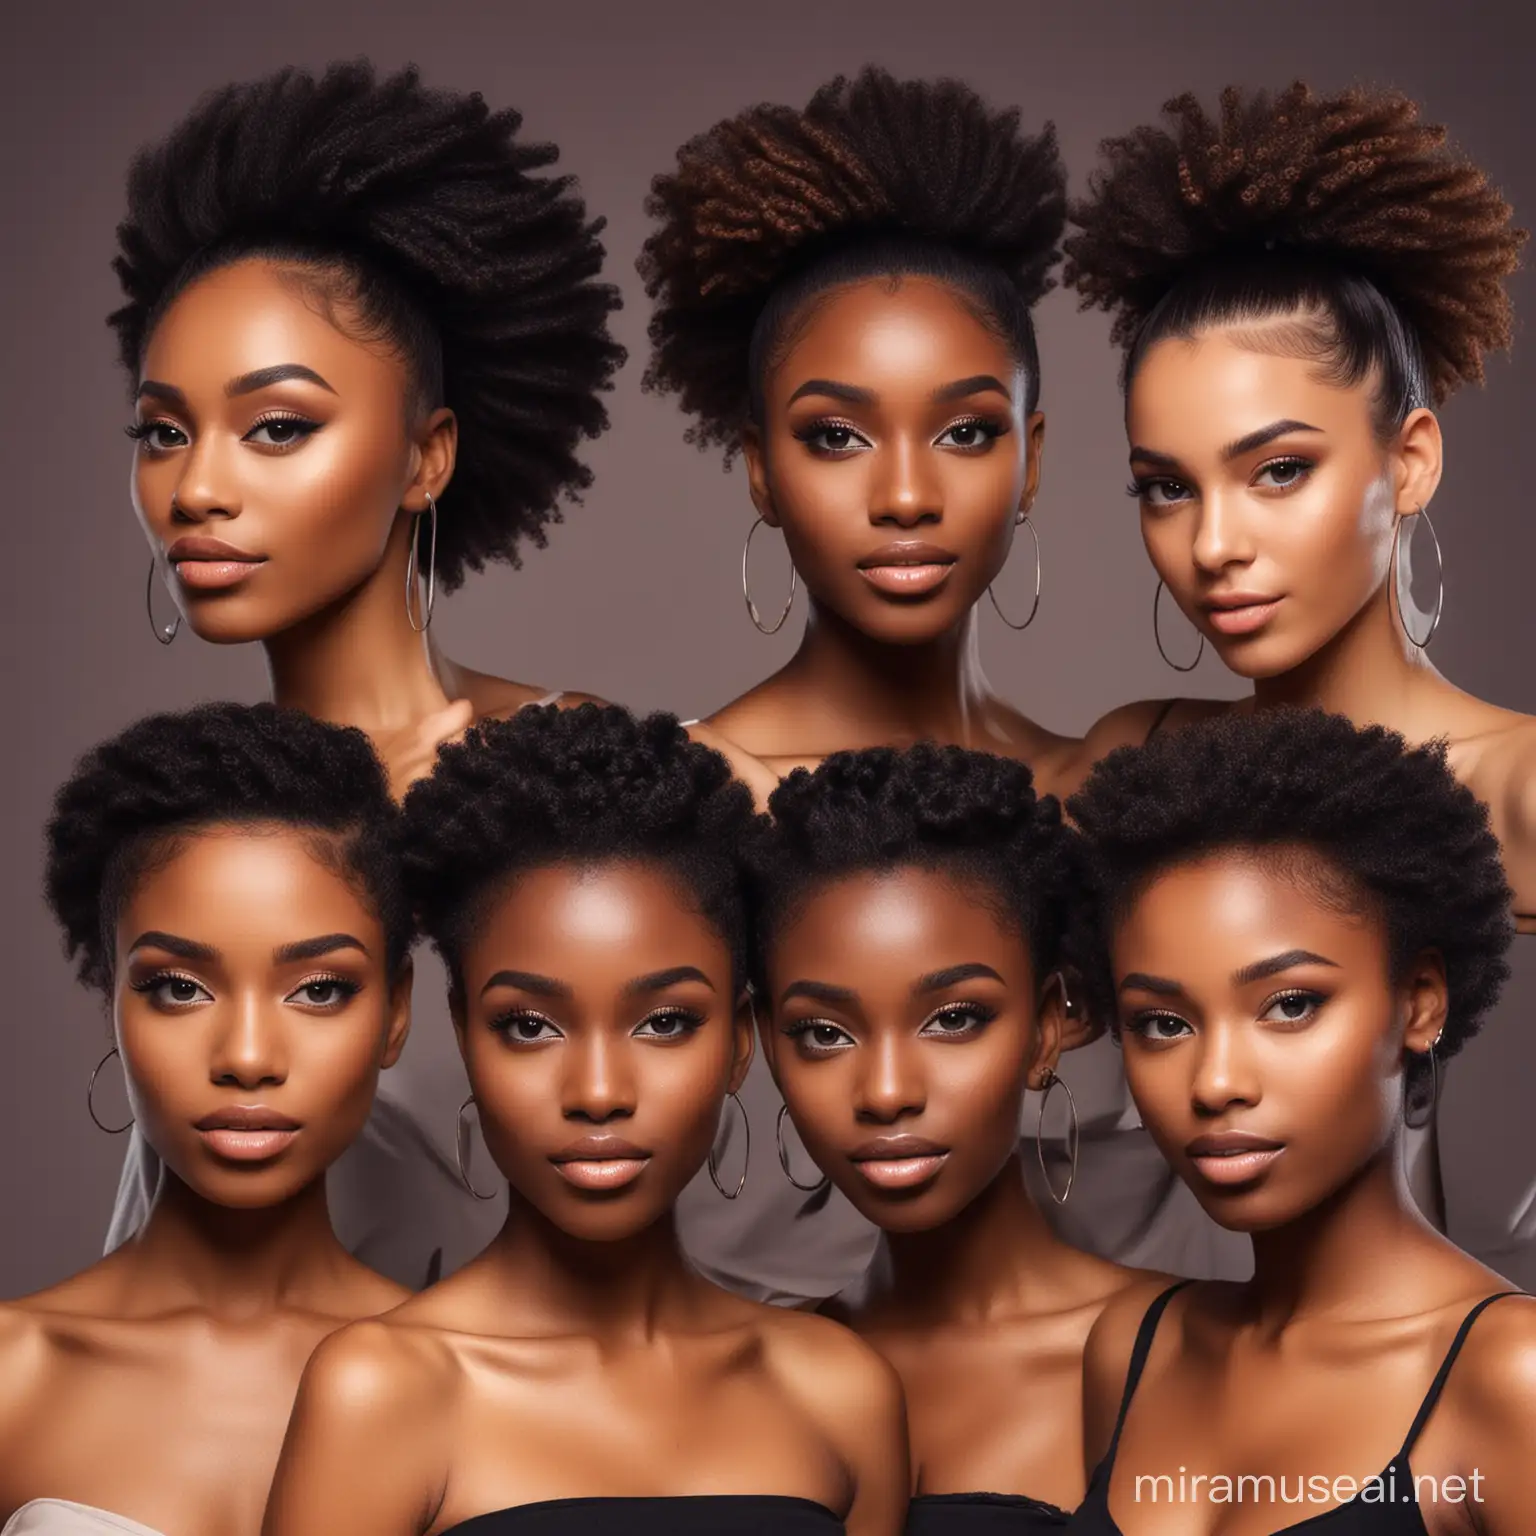 Stylish DarkSkinned Girls with Diverse Hairstyles and Glowing Skin